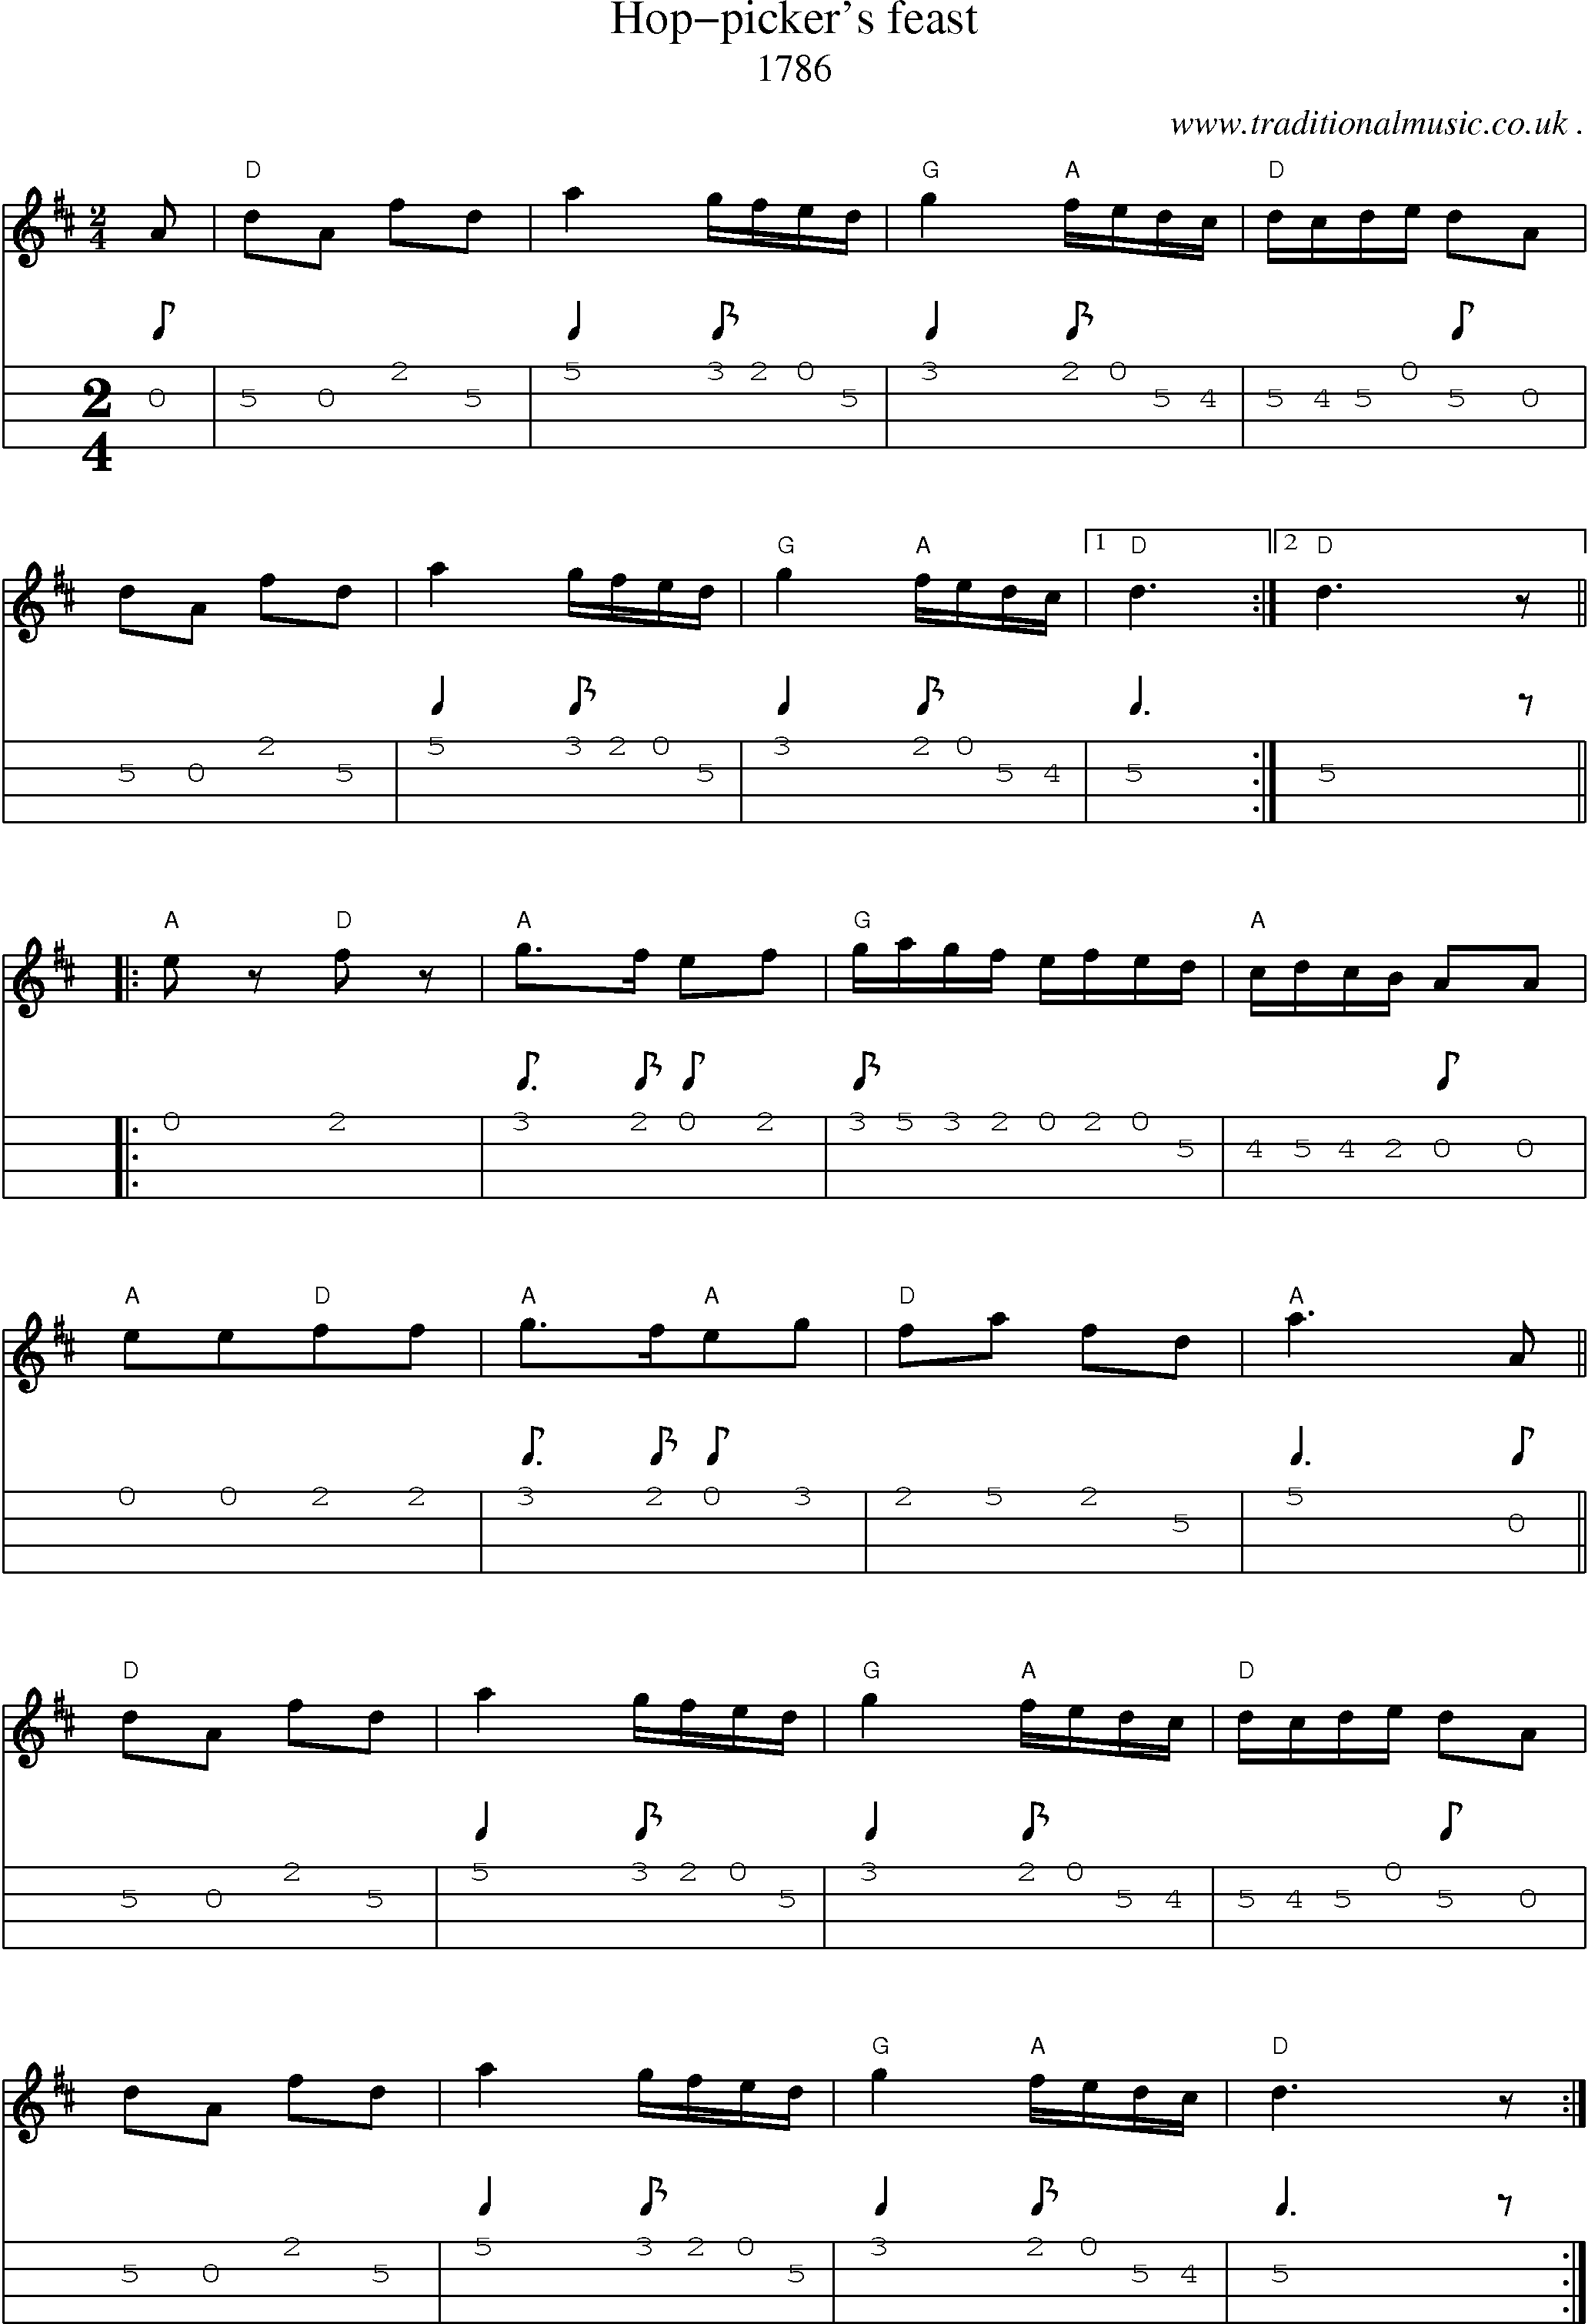 Sheet-Music and Mandolin Tabs for Hop-pickers Feast